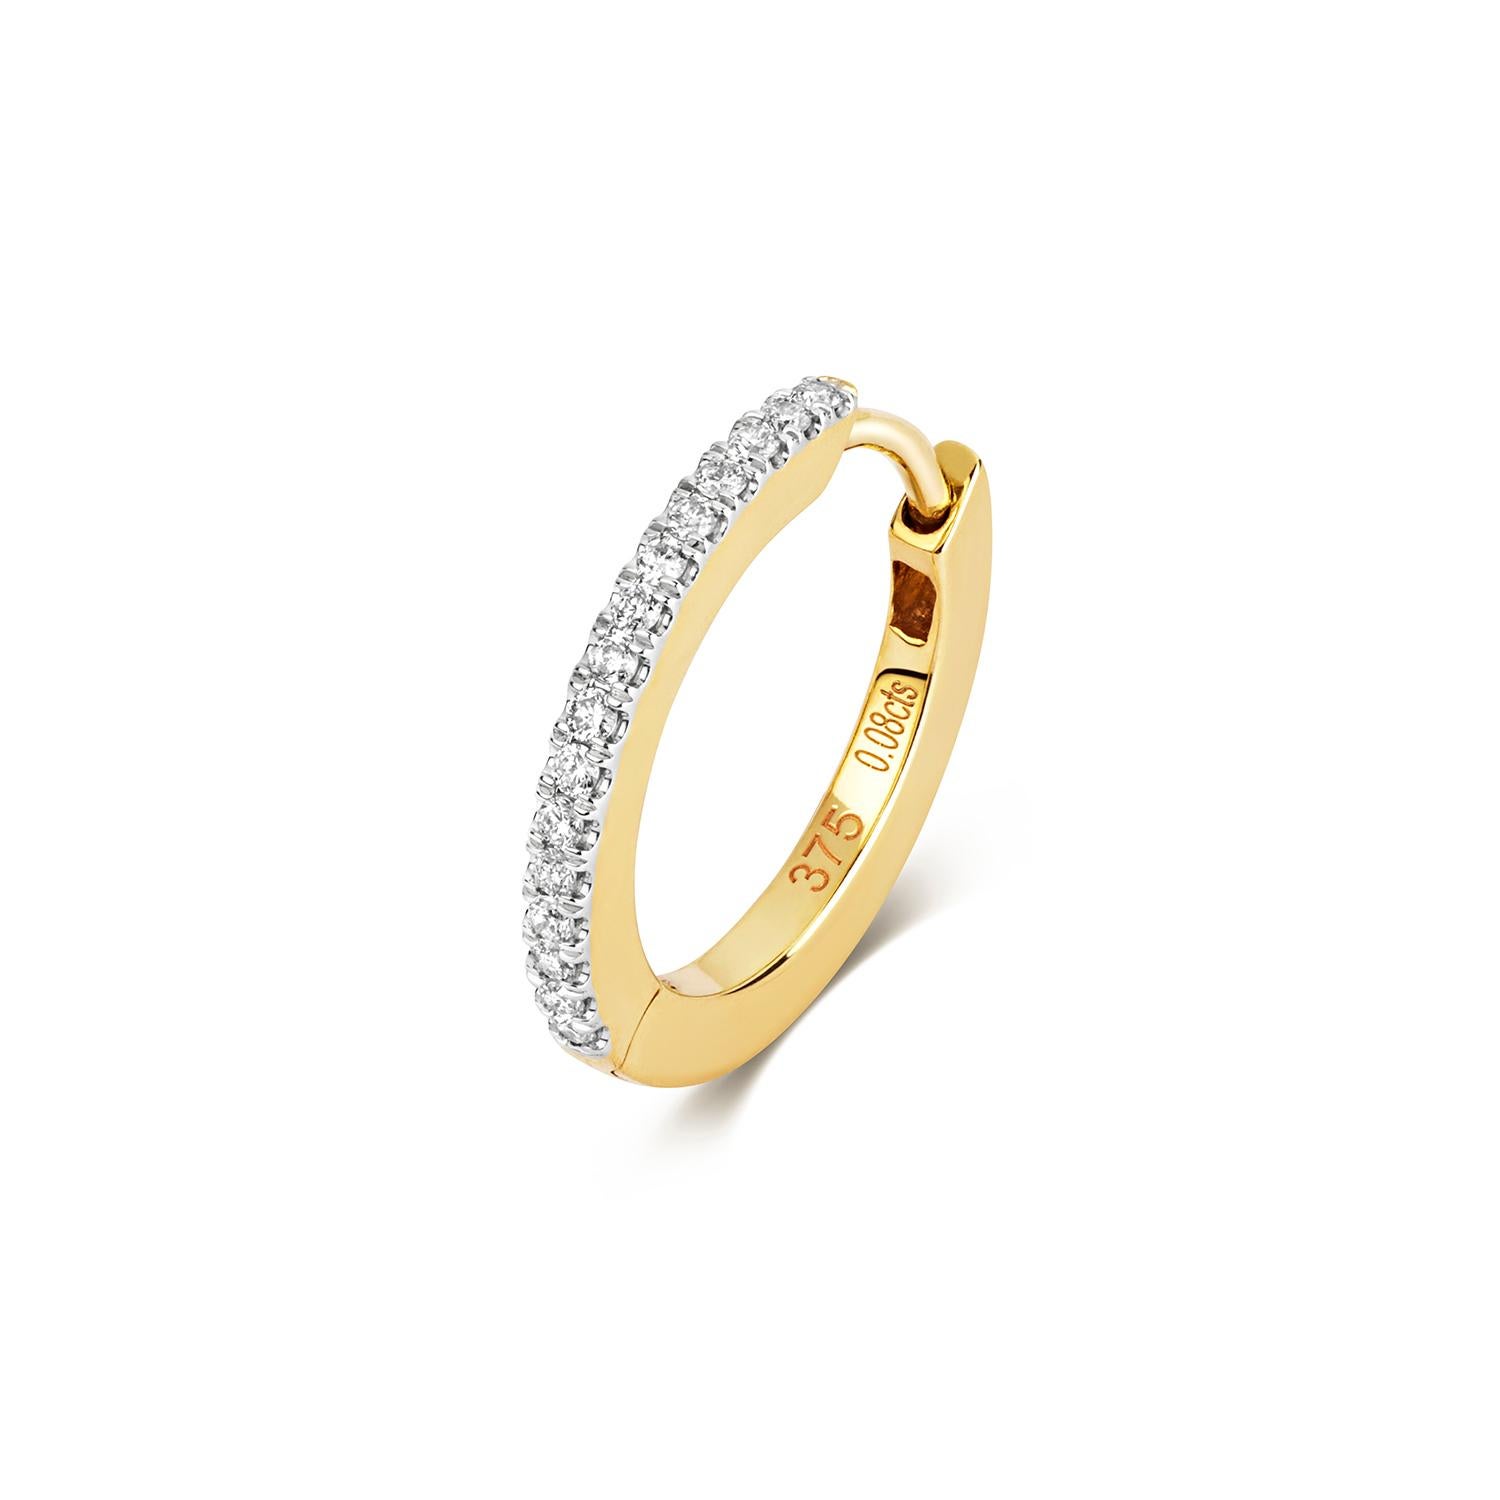 DIAMOND CARTILAGE HOOP IN 9CT Gold In New Condition For Sale In Ilford, GB